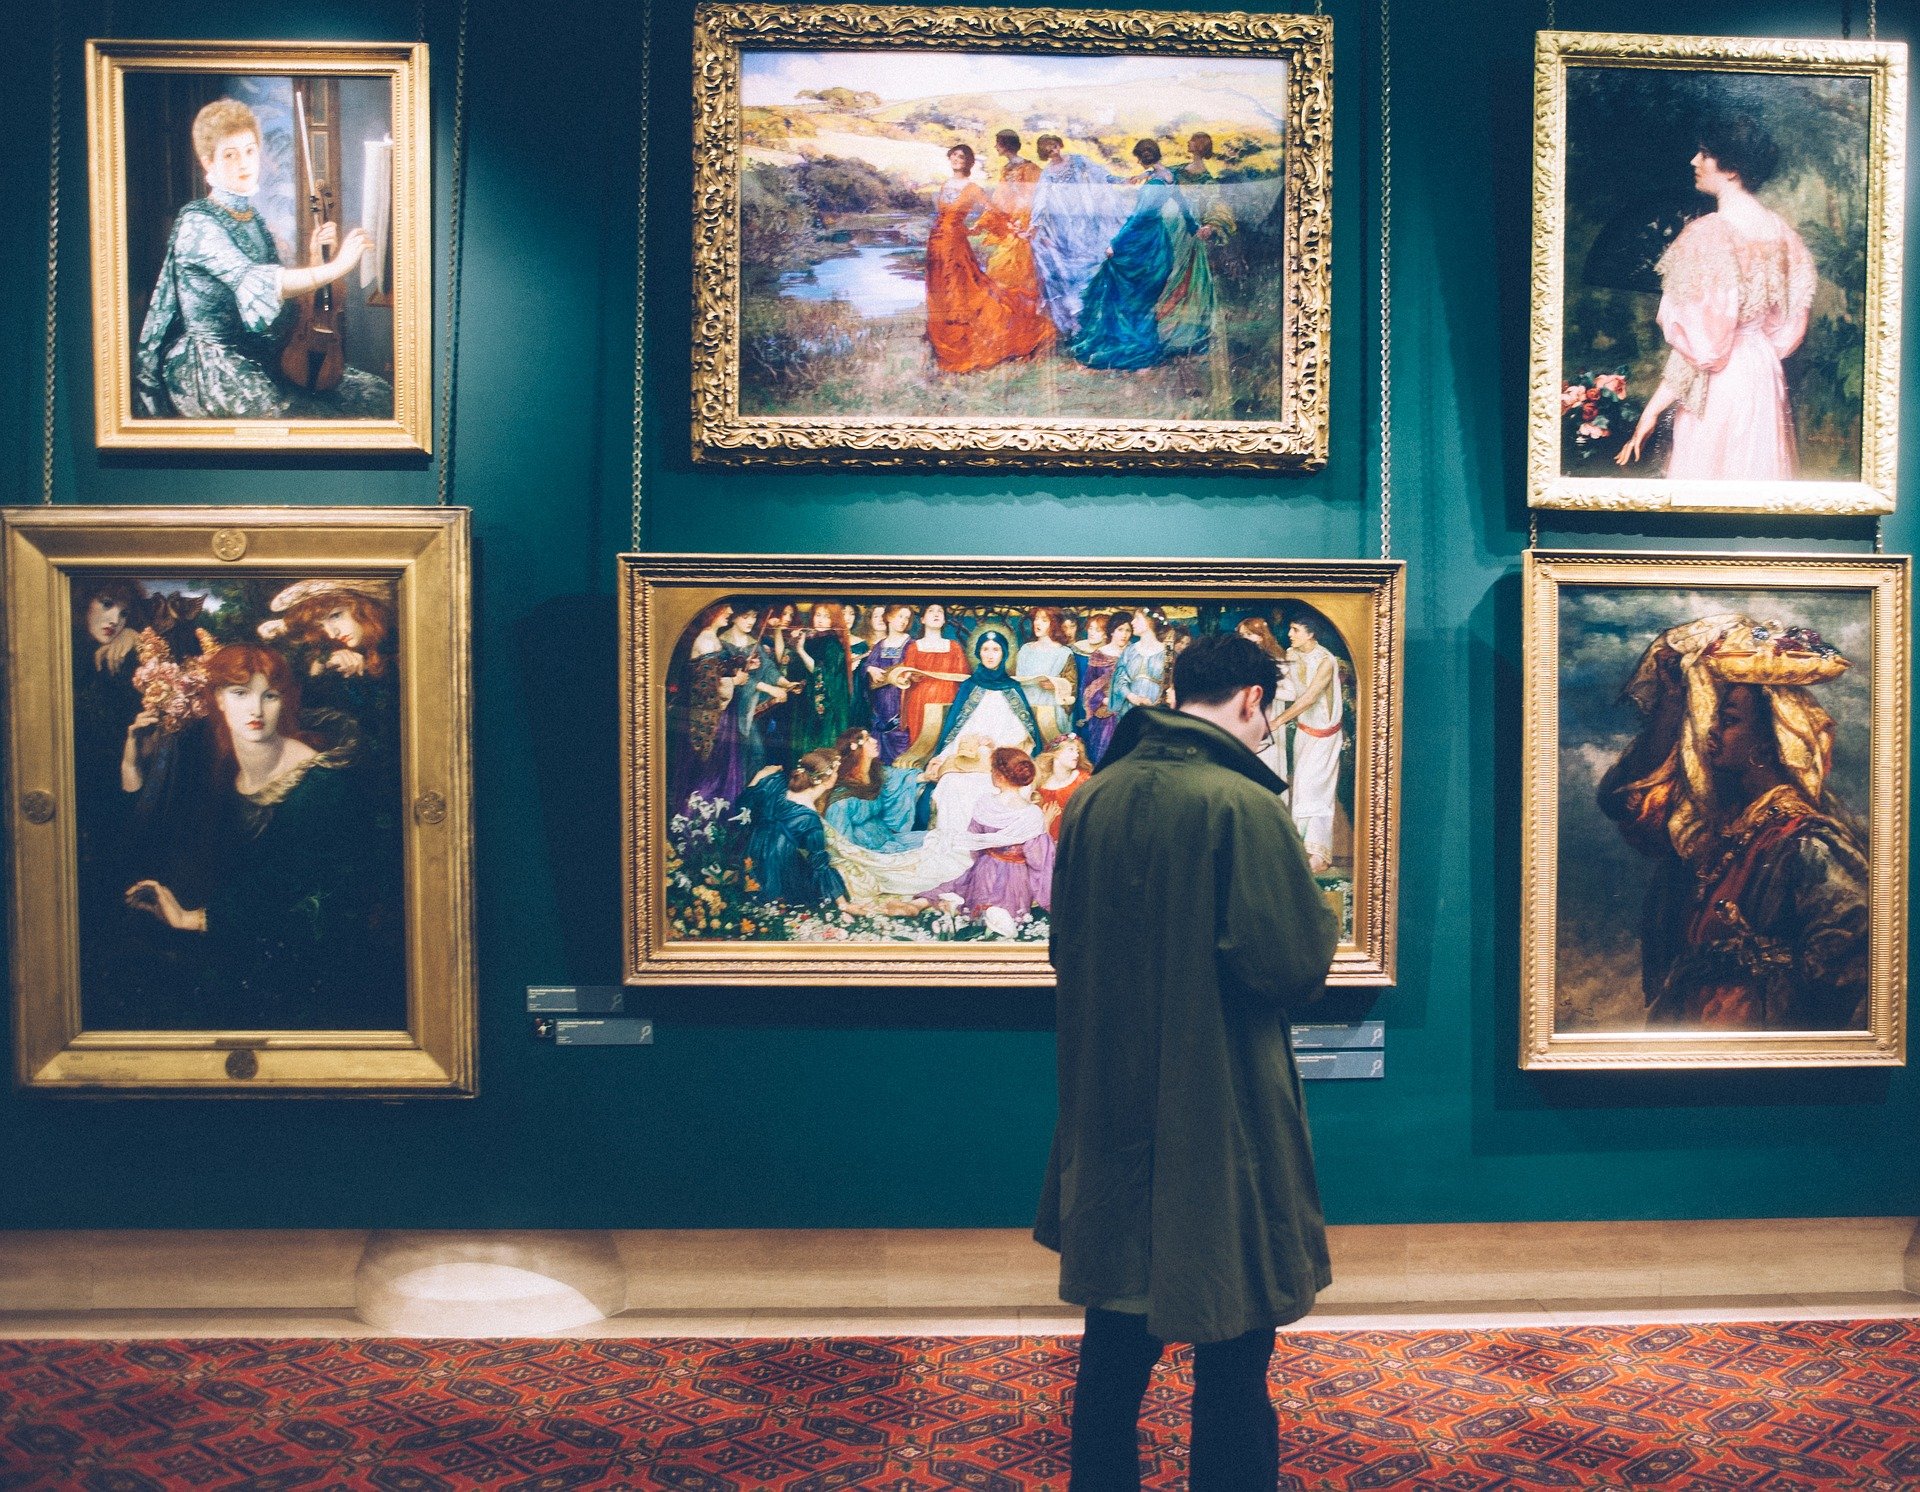 Man looking at paintings on wall of a museum